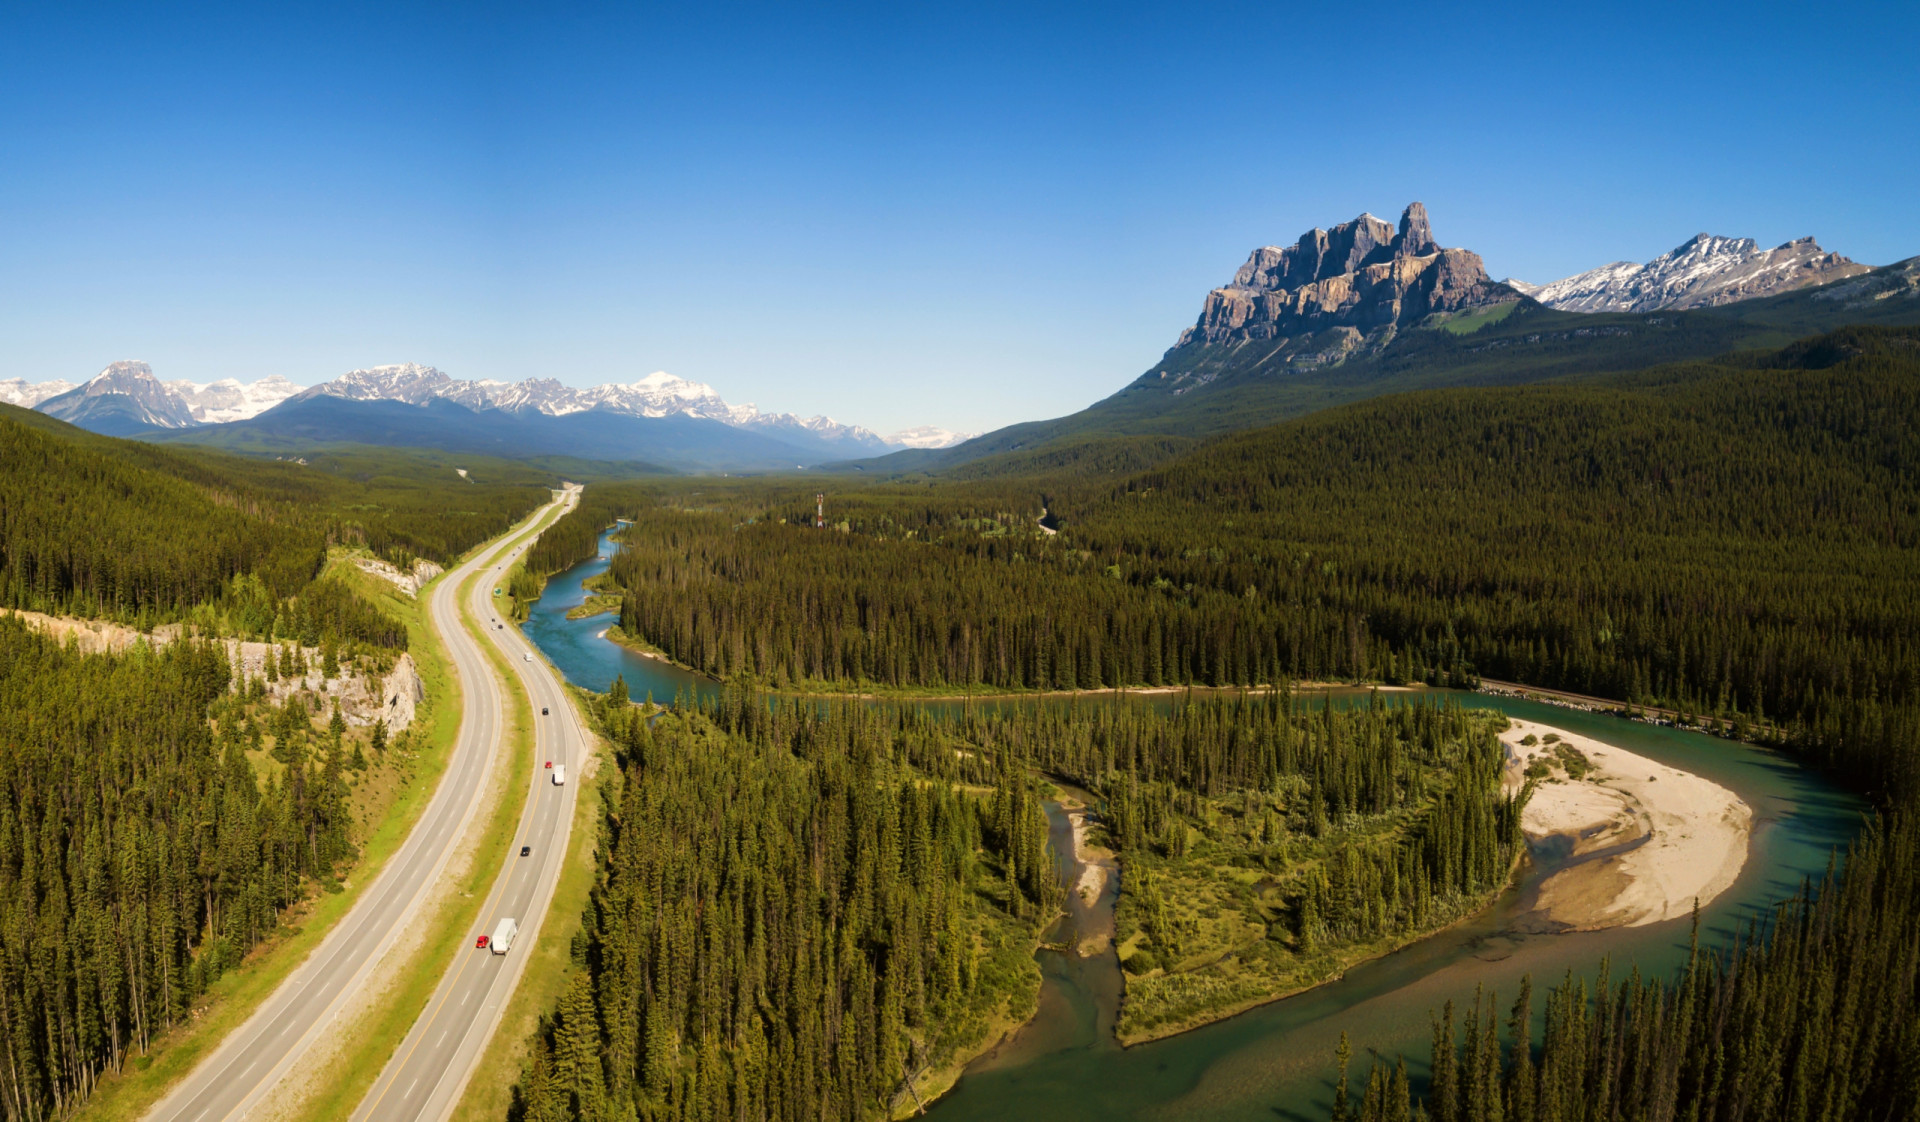 <p>And at 4,645 miles (7,476 km) long, the Trans-Canada Highway travels through all 10 provinces of Canada, from the Pacific Ocean on the west coast to the Atlantic Ocean on the east coast, to make this scenic route one of the longest of its type in the world.</p> <p>Sources: (National Highways) (Federal Highway Administration) (ResearchGate) (Guinness World Records) </p> <p>See also: <a href="https://www.starsinsider.com/lifestyle/618144/the-canada-united-states-border-is-the-longest-international-border-in-the-world">The Canada-United States border is the longest international border in the world</a></p>